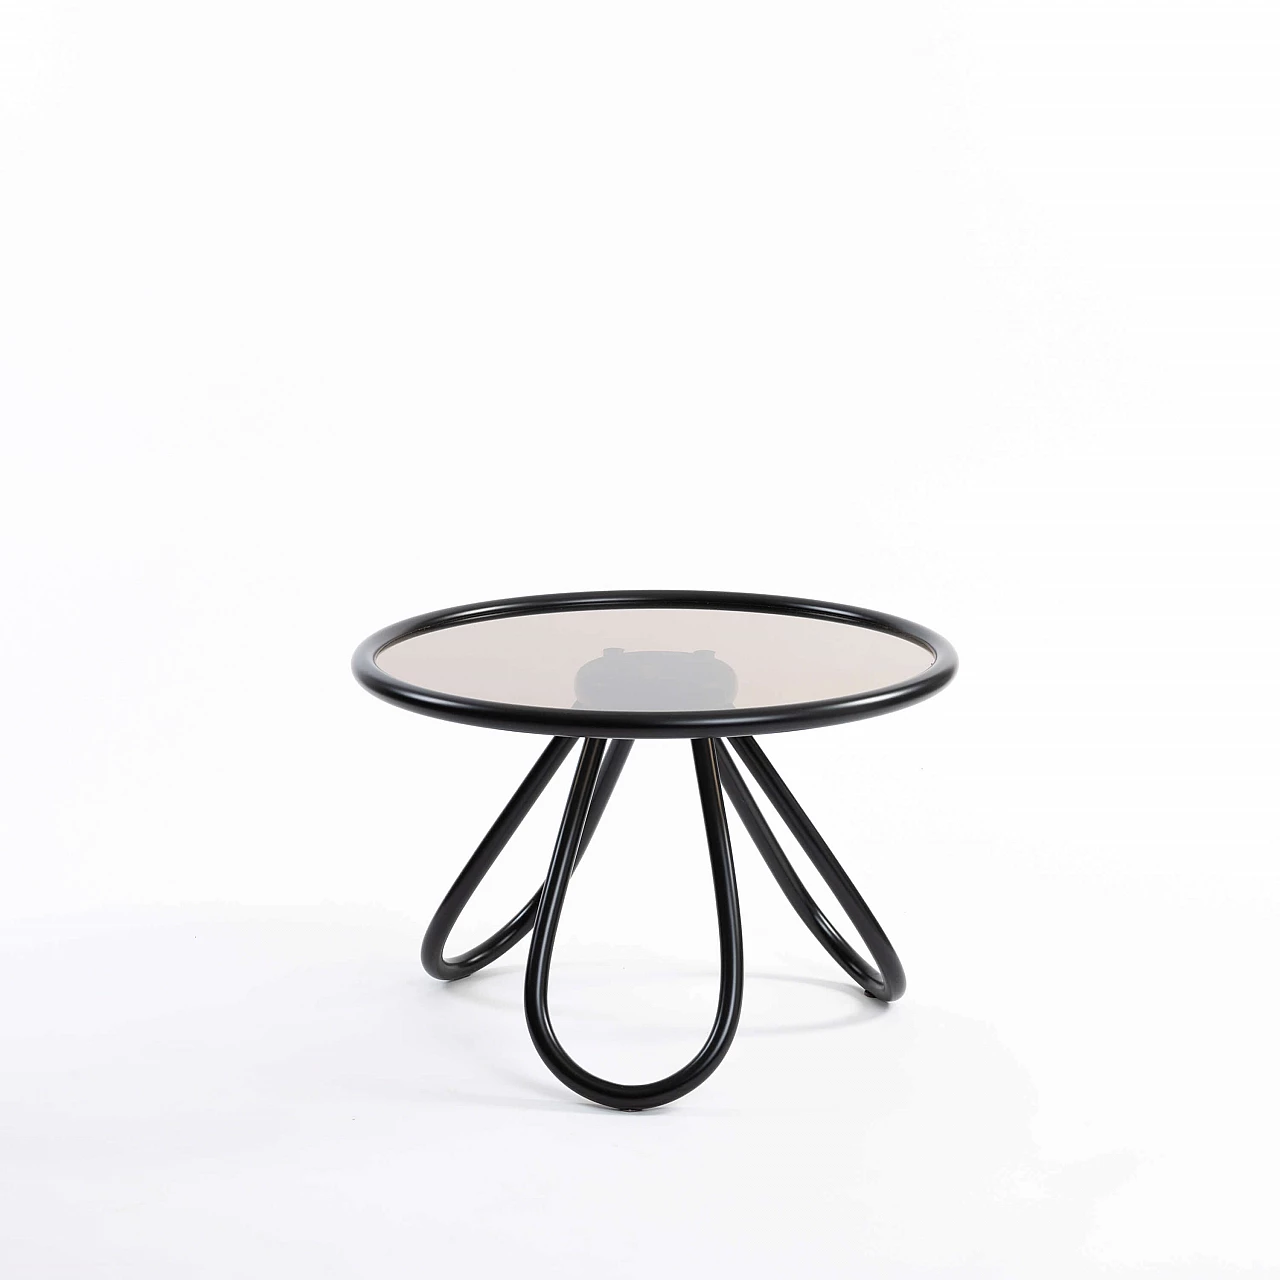 Curved beech and glass coffee table by Gebrüder Thonet 1